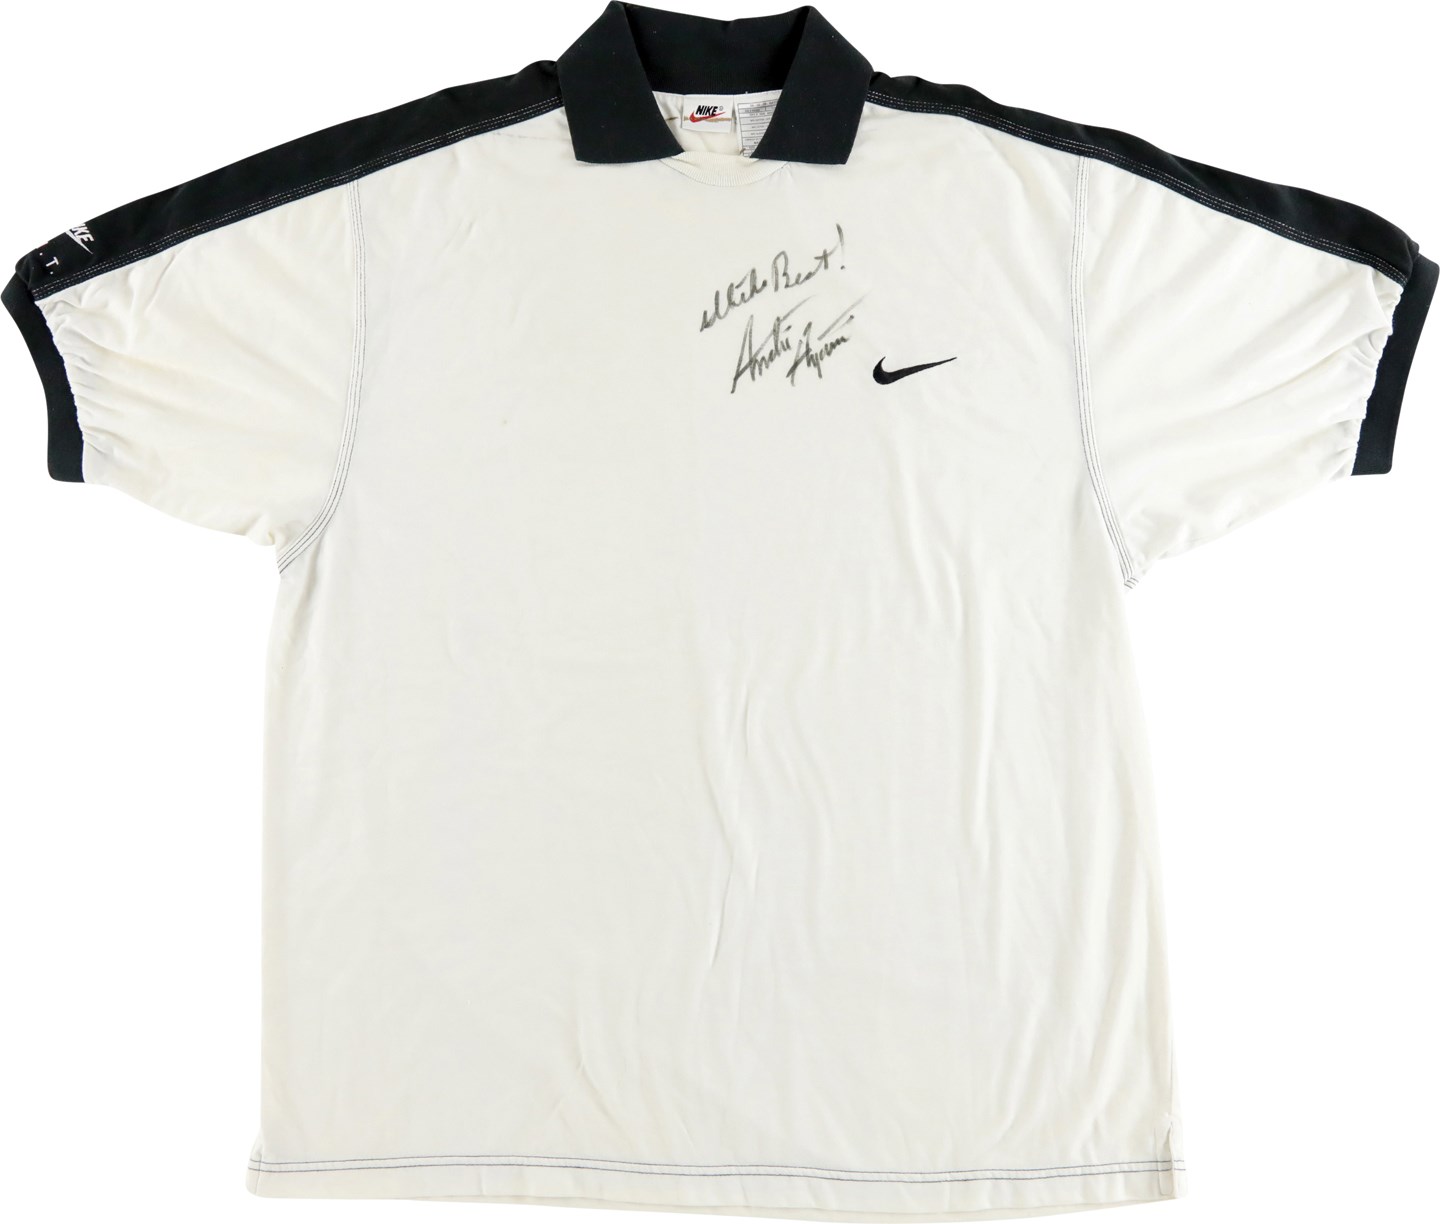 Olympics and All Sports - 1996 Andre Agassi Signed Match Worn Shirt Attributed to Australian Open Match vs. Jim Courier (PSA & Possible Photo-Match)